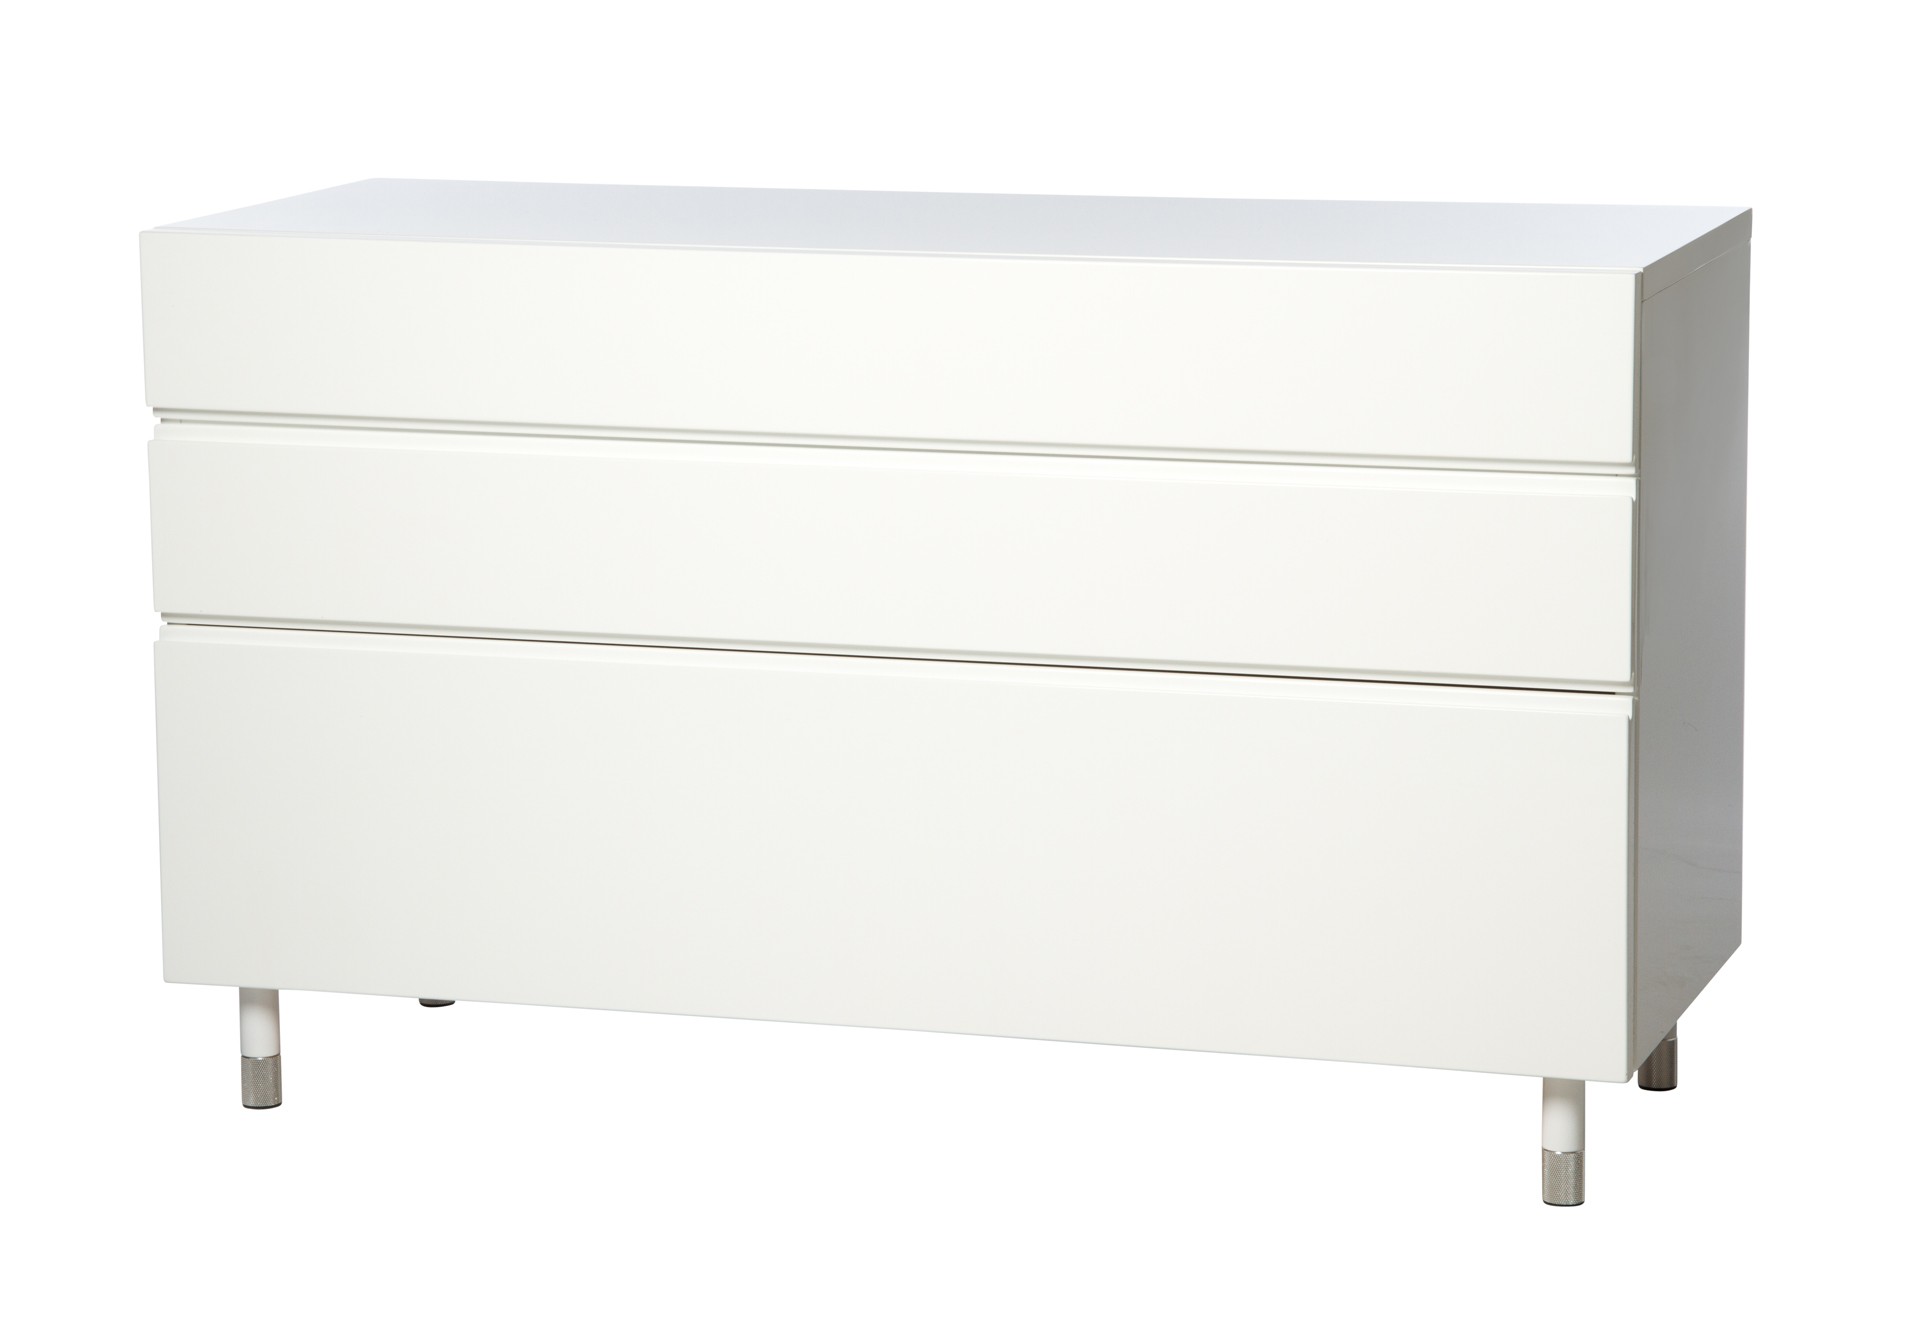 1a.Bedroom Vanity 3 Drawer white 3Q front small